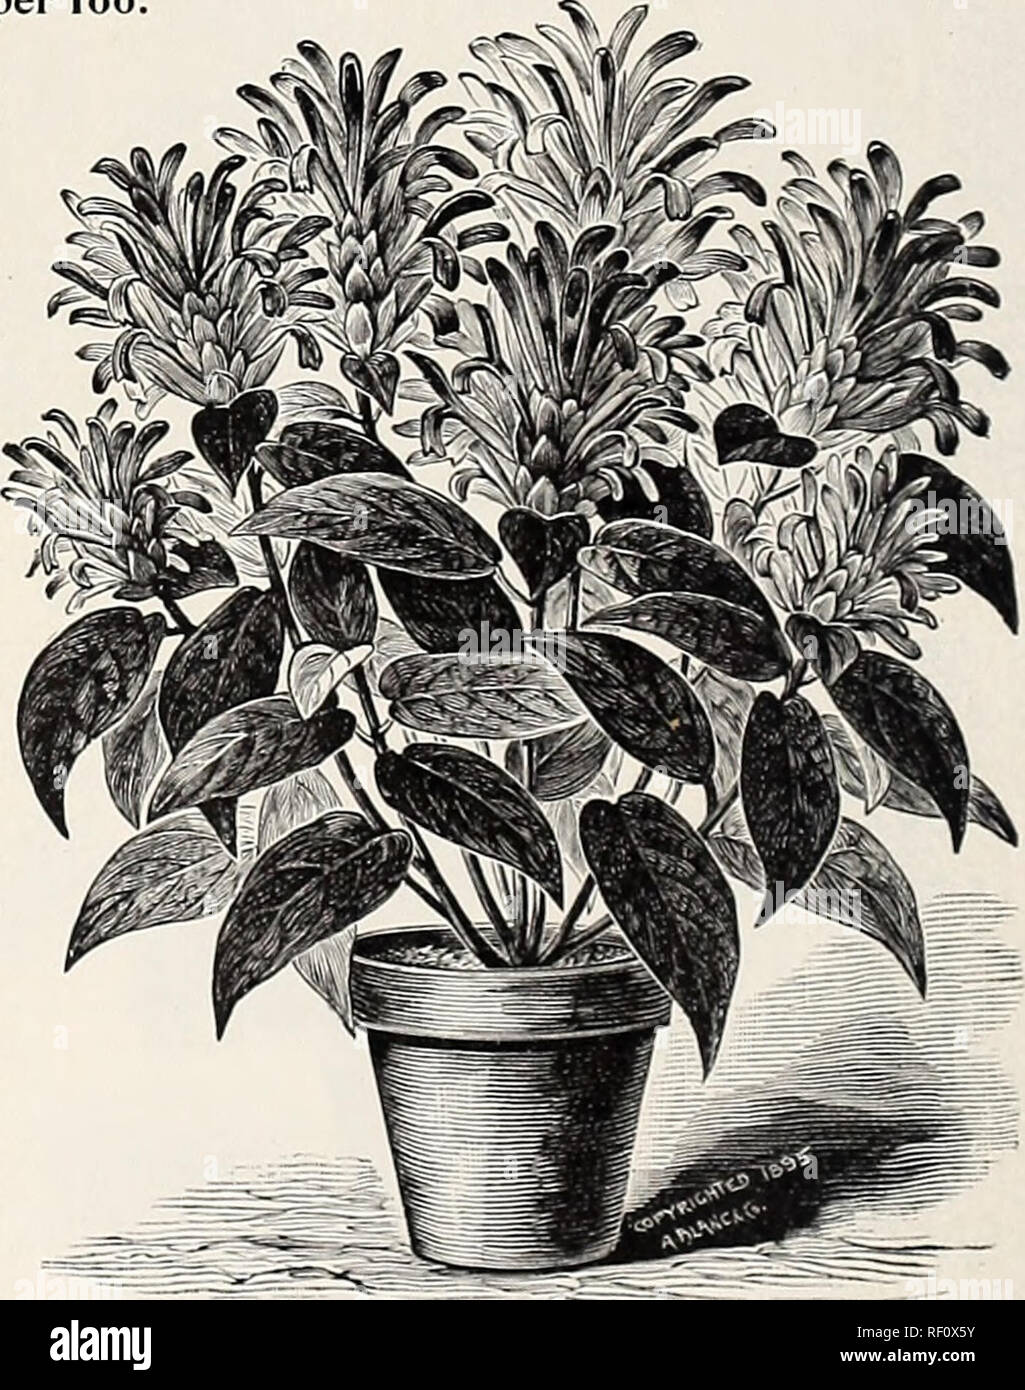 . Catalogue of novelties and specialites : plants bulbs fruits. Nursery stock, Pennsylvania, Philadelphia, Catalogs; Plants, Ornamental, Catalogs; Flowers, Catalogs; Fruit, Catalogs; Nursery stock; Plants, Ornamental; Flowers; Fruit. GYNURA AURANTIACA—THE VELVET PLANT. A Rival to the Strobilanthes—Far more beautiful in Color. As Strobilanthes proved one of the very finest bedding and ornamental plants made popidar by us—a sale of over 5,coo last season fully attesting this—so will this, a still handsomer plant, take a place, not only in every choice garden, but also among the rarest and most b Stock Photo